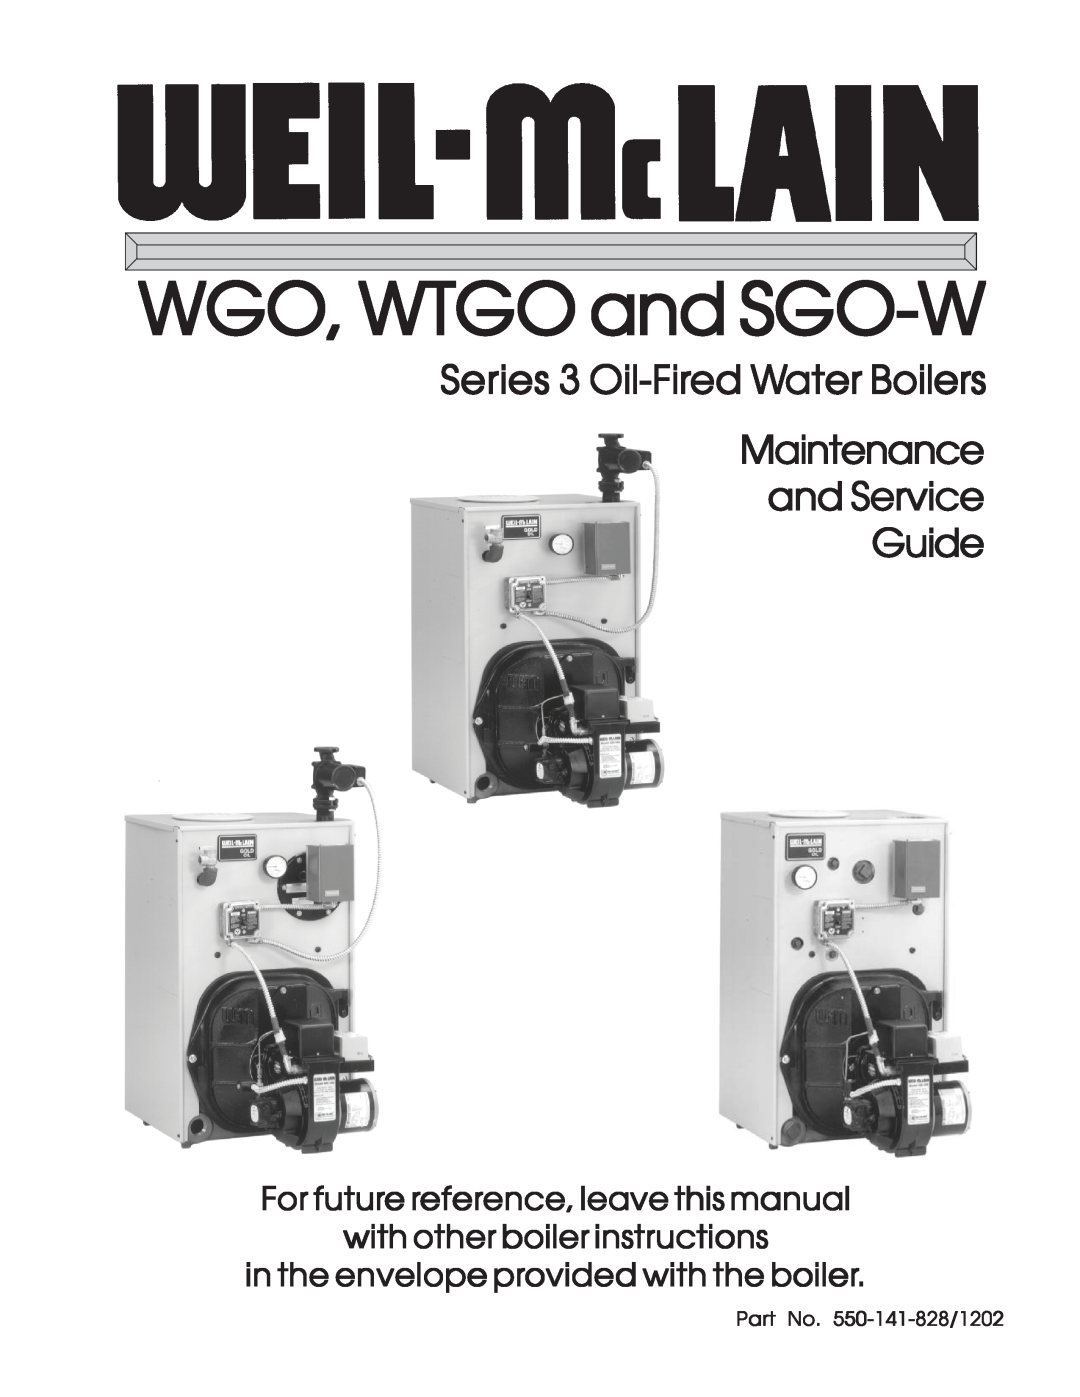 Weil-McLain manual Part No. 550-141-828/1202, WGO, WTGO and SGO-W, Series 3 Oil-FiredWater Boilers Maintenance 